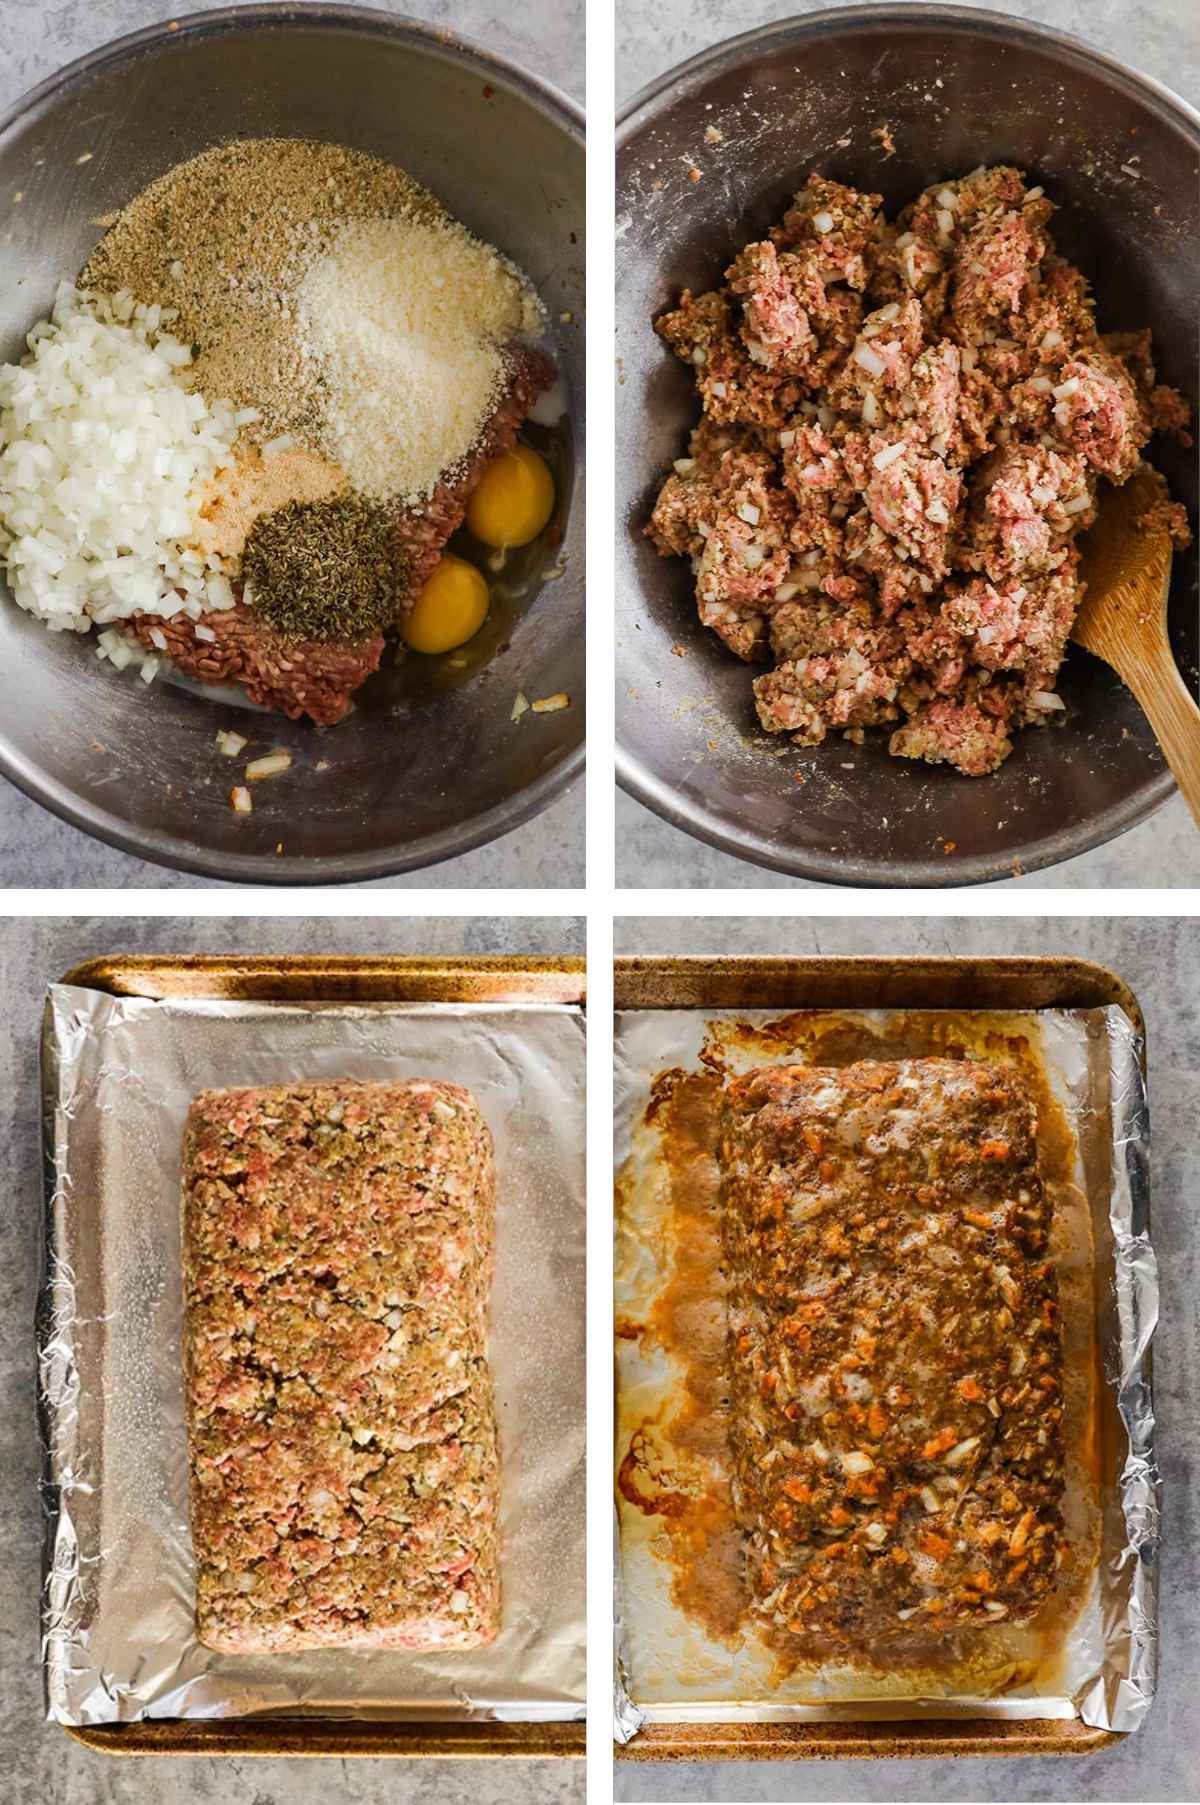 Four images: 1. all ingredients in a bowl. 2. all ingredients mixed. 3. uncooked loaf on baking sheet. 4. cooked loaf on baking sheet